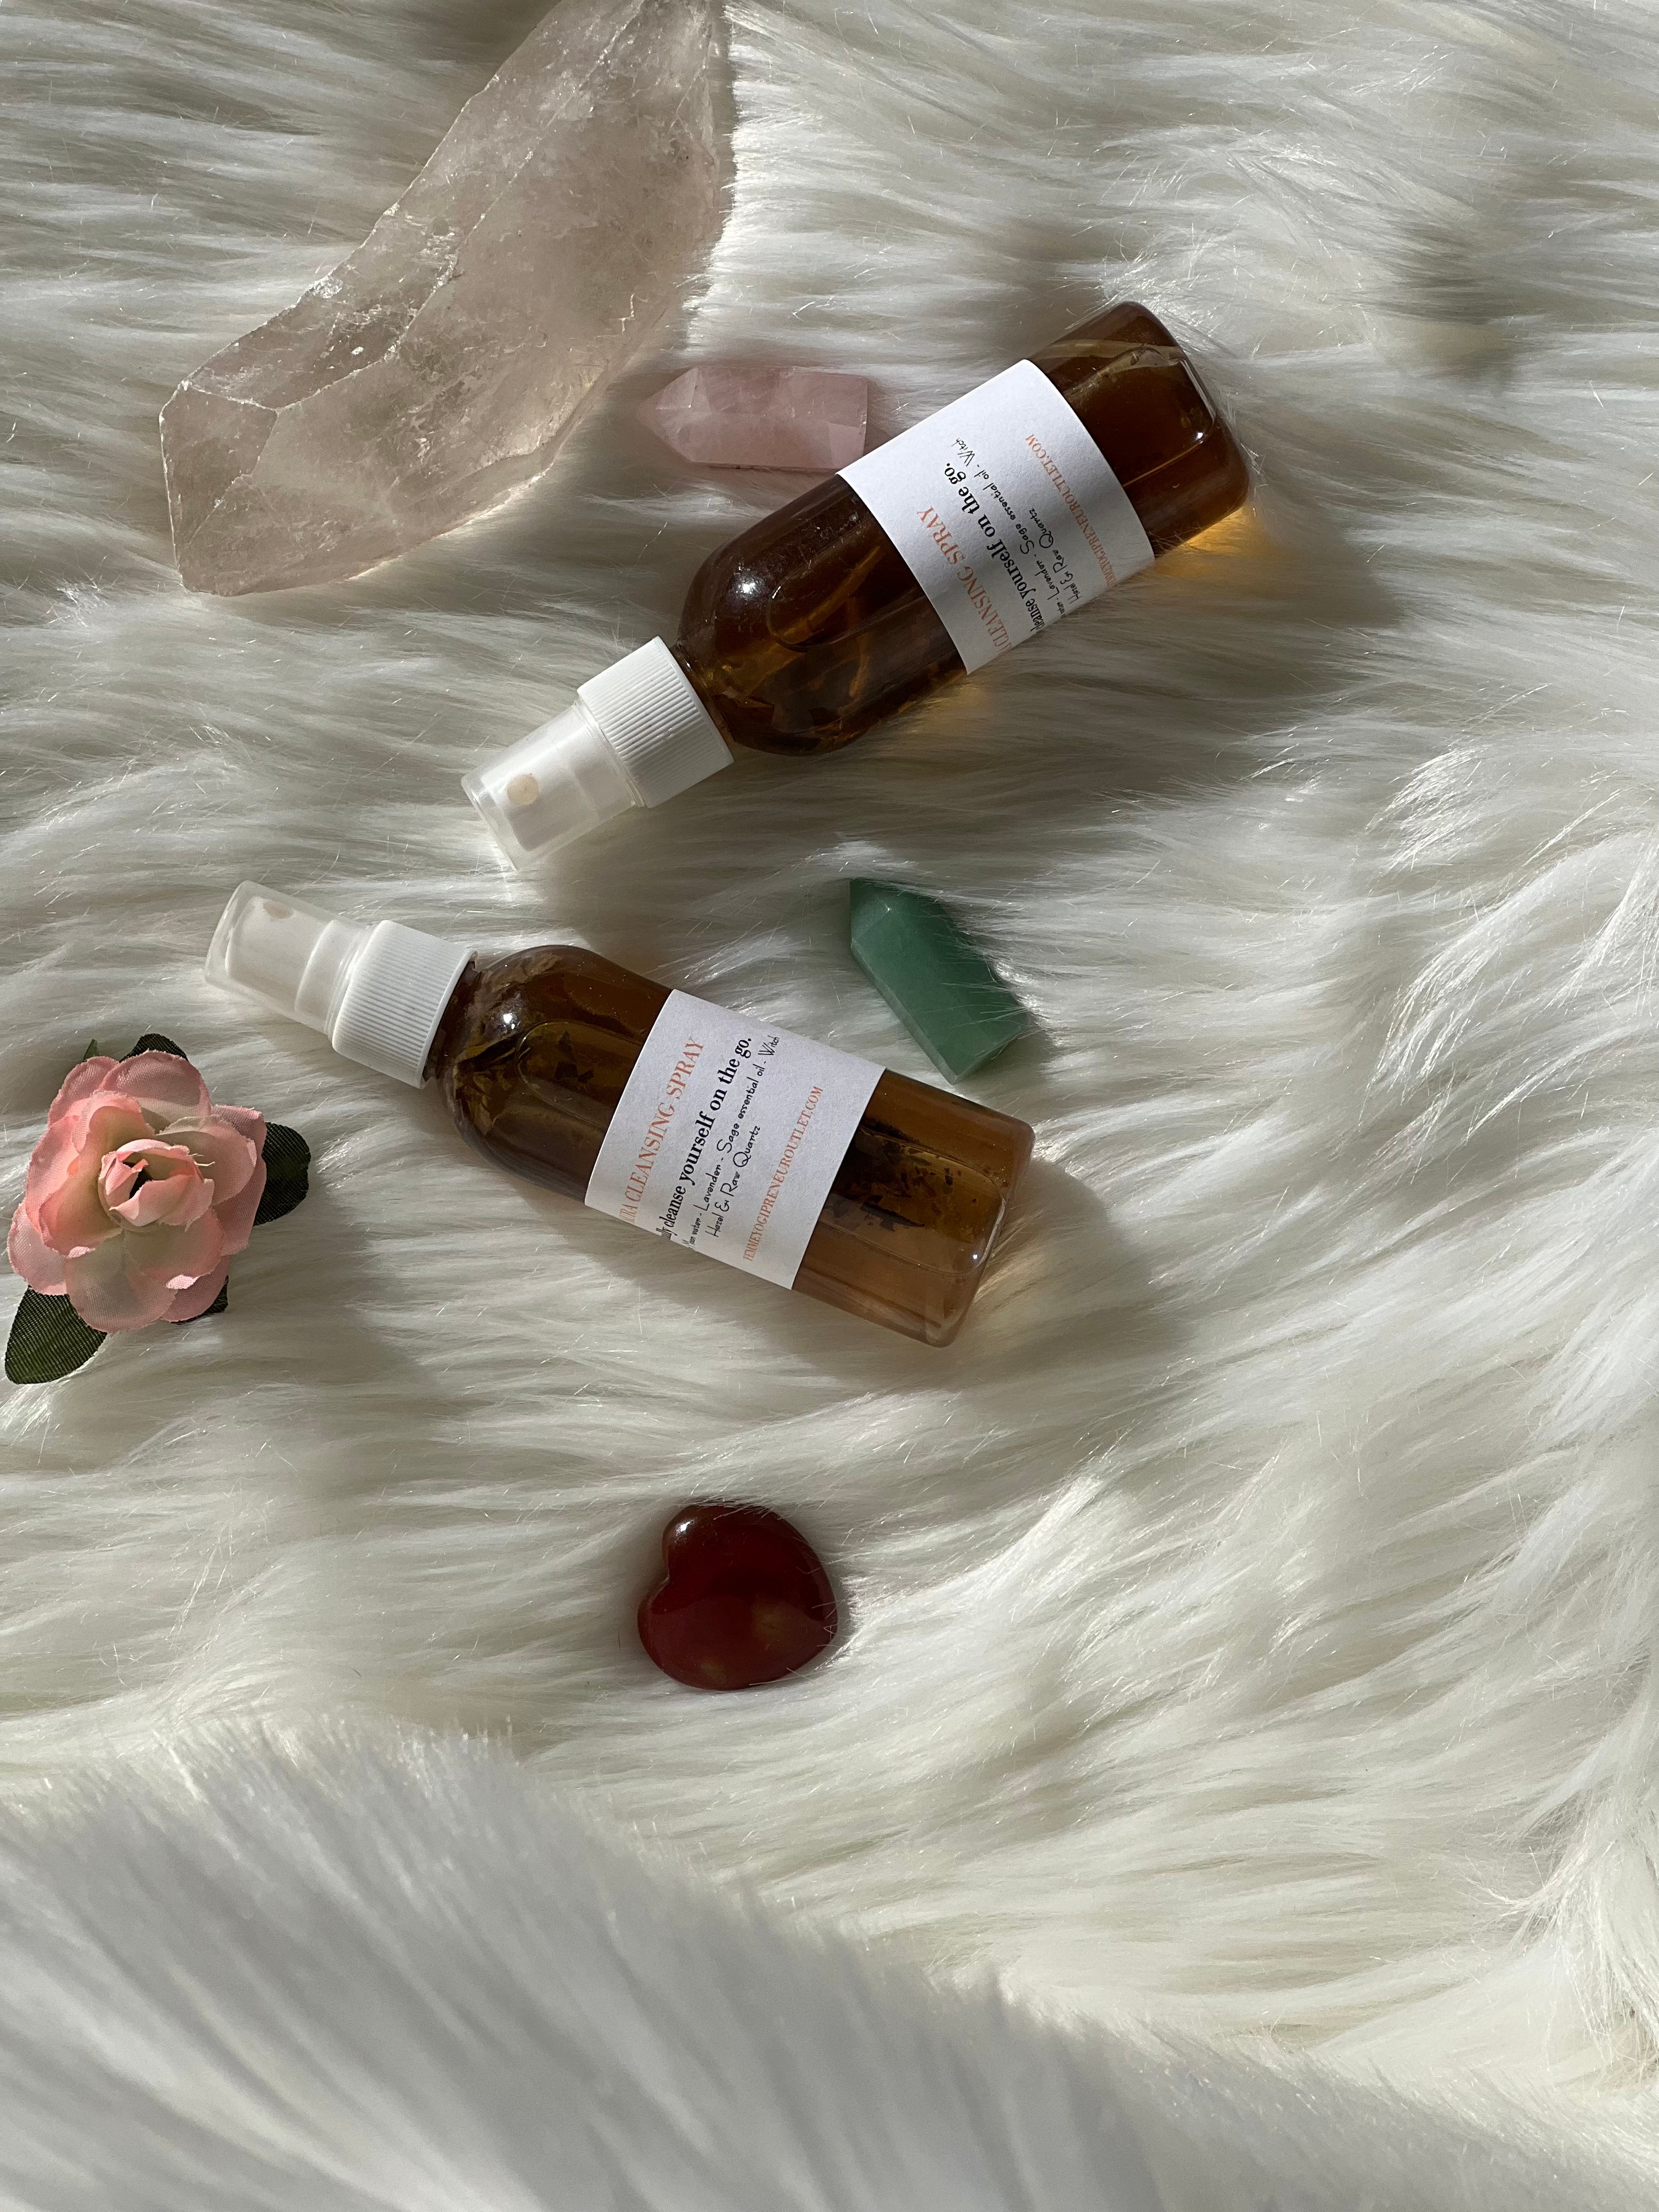 Aura cleansing spray infused with Quartz